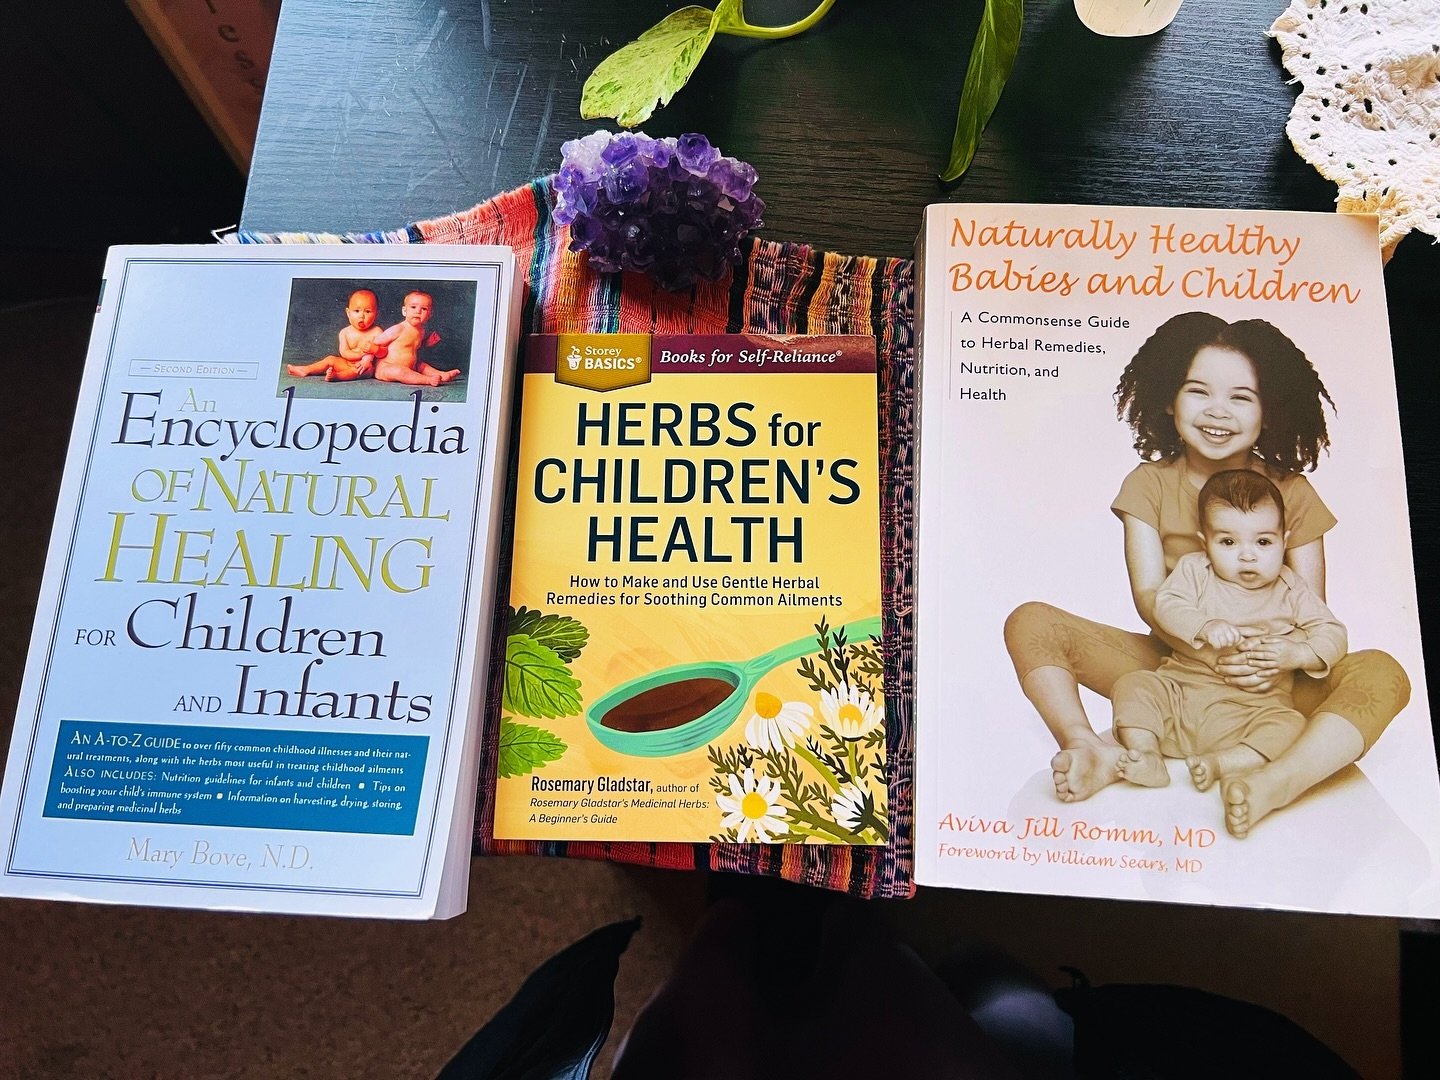 Beautiful community, sharing a few tried and true children&rsquo;s herbal medicine books with you! ✨ While this topic is a popular inquiry, it can feel confusing and overwhelming knowing how to confidently support children with herbs. 

I truly belie